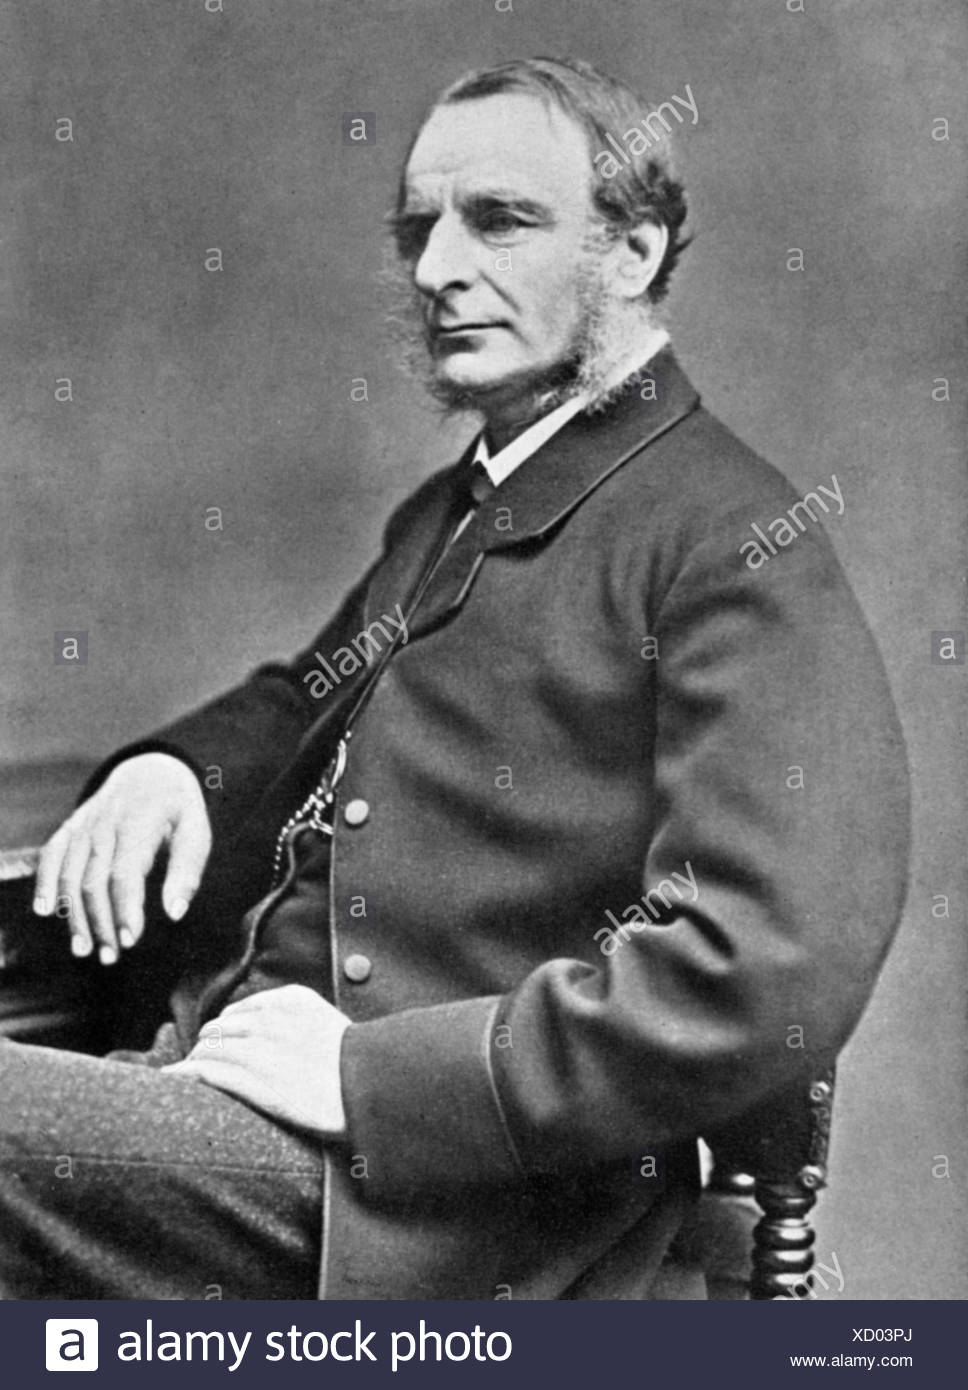 Charles Kingsley High Resolution Stock Photography and Images - Alamy